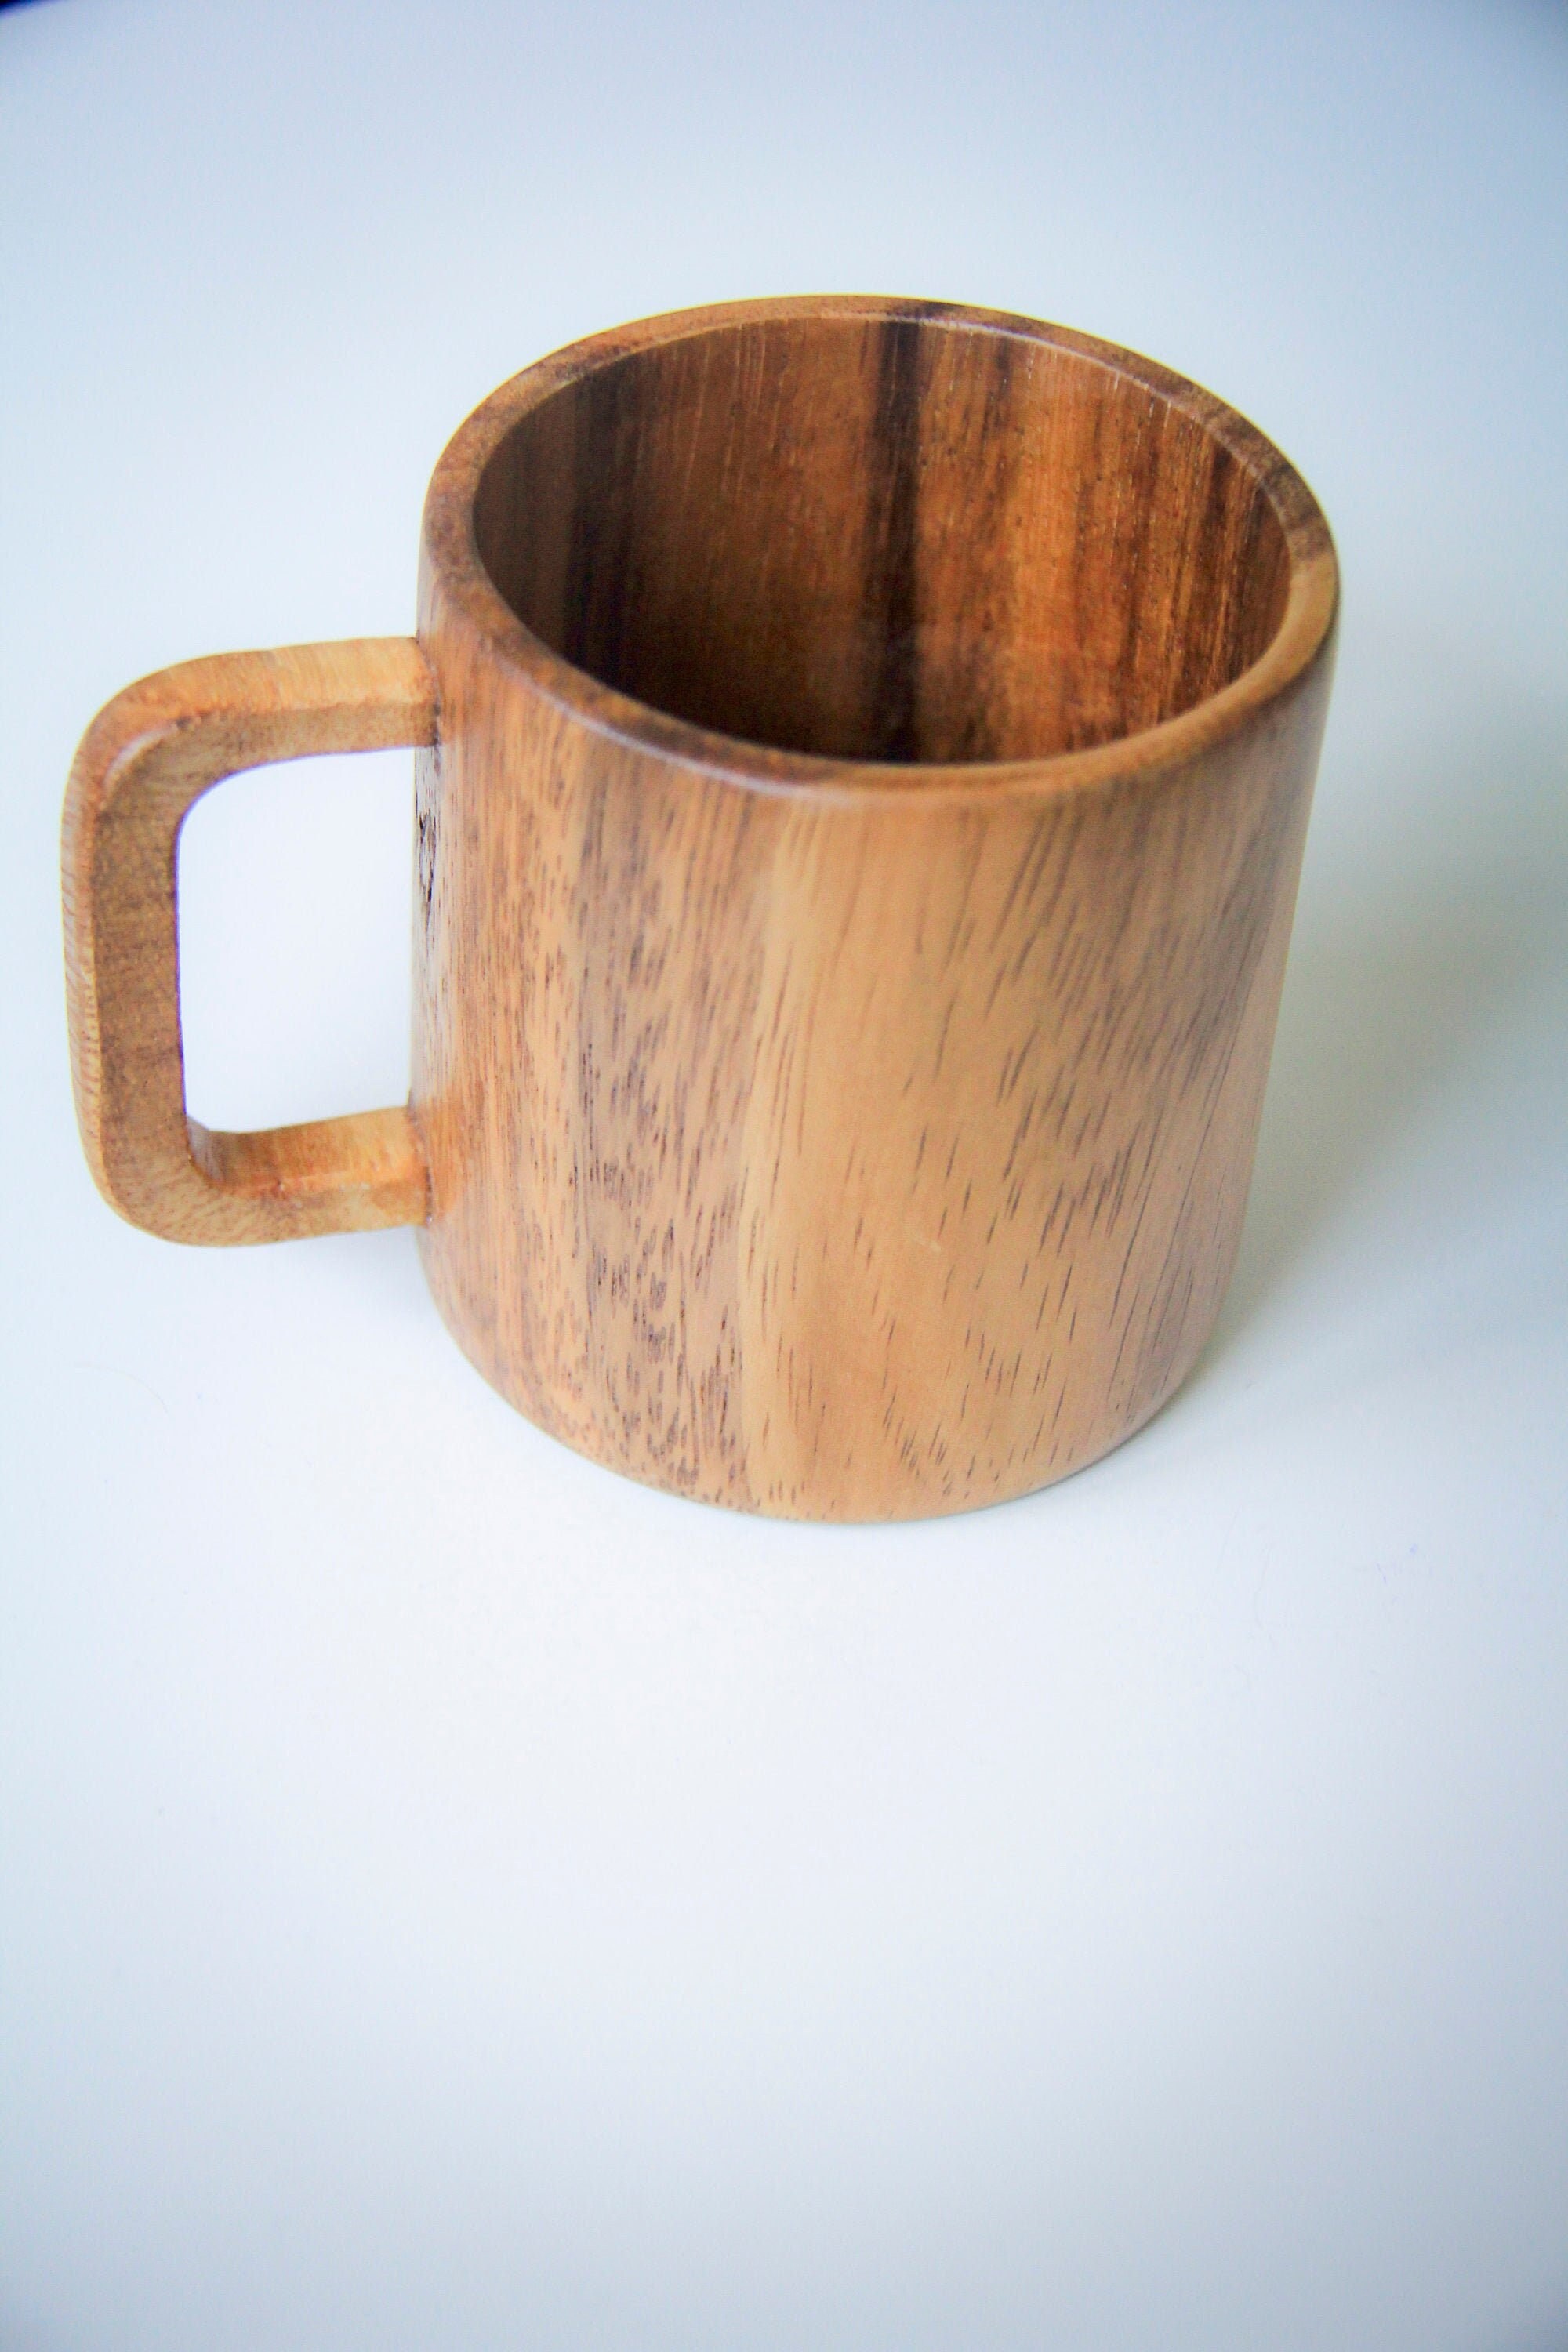 URMAGIC Wooden Cup, Wood Camp Cup with Double Holes Handle and Leather  Lanyard(5-9 Oz),Portable Wood…See more URMAGIC Wooden Cup, Wood Camp Cup  with